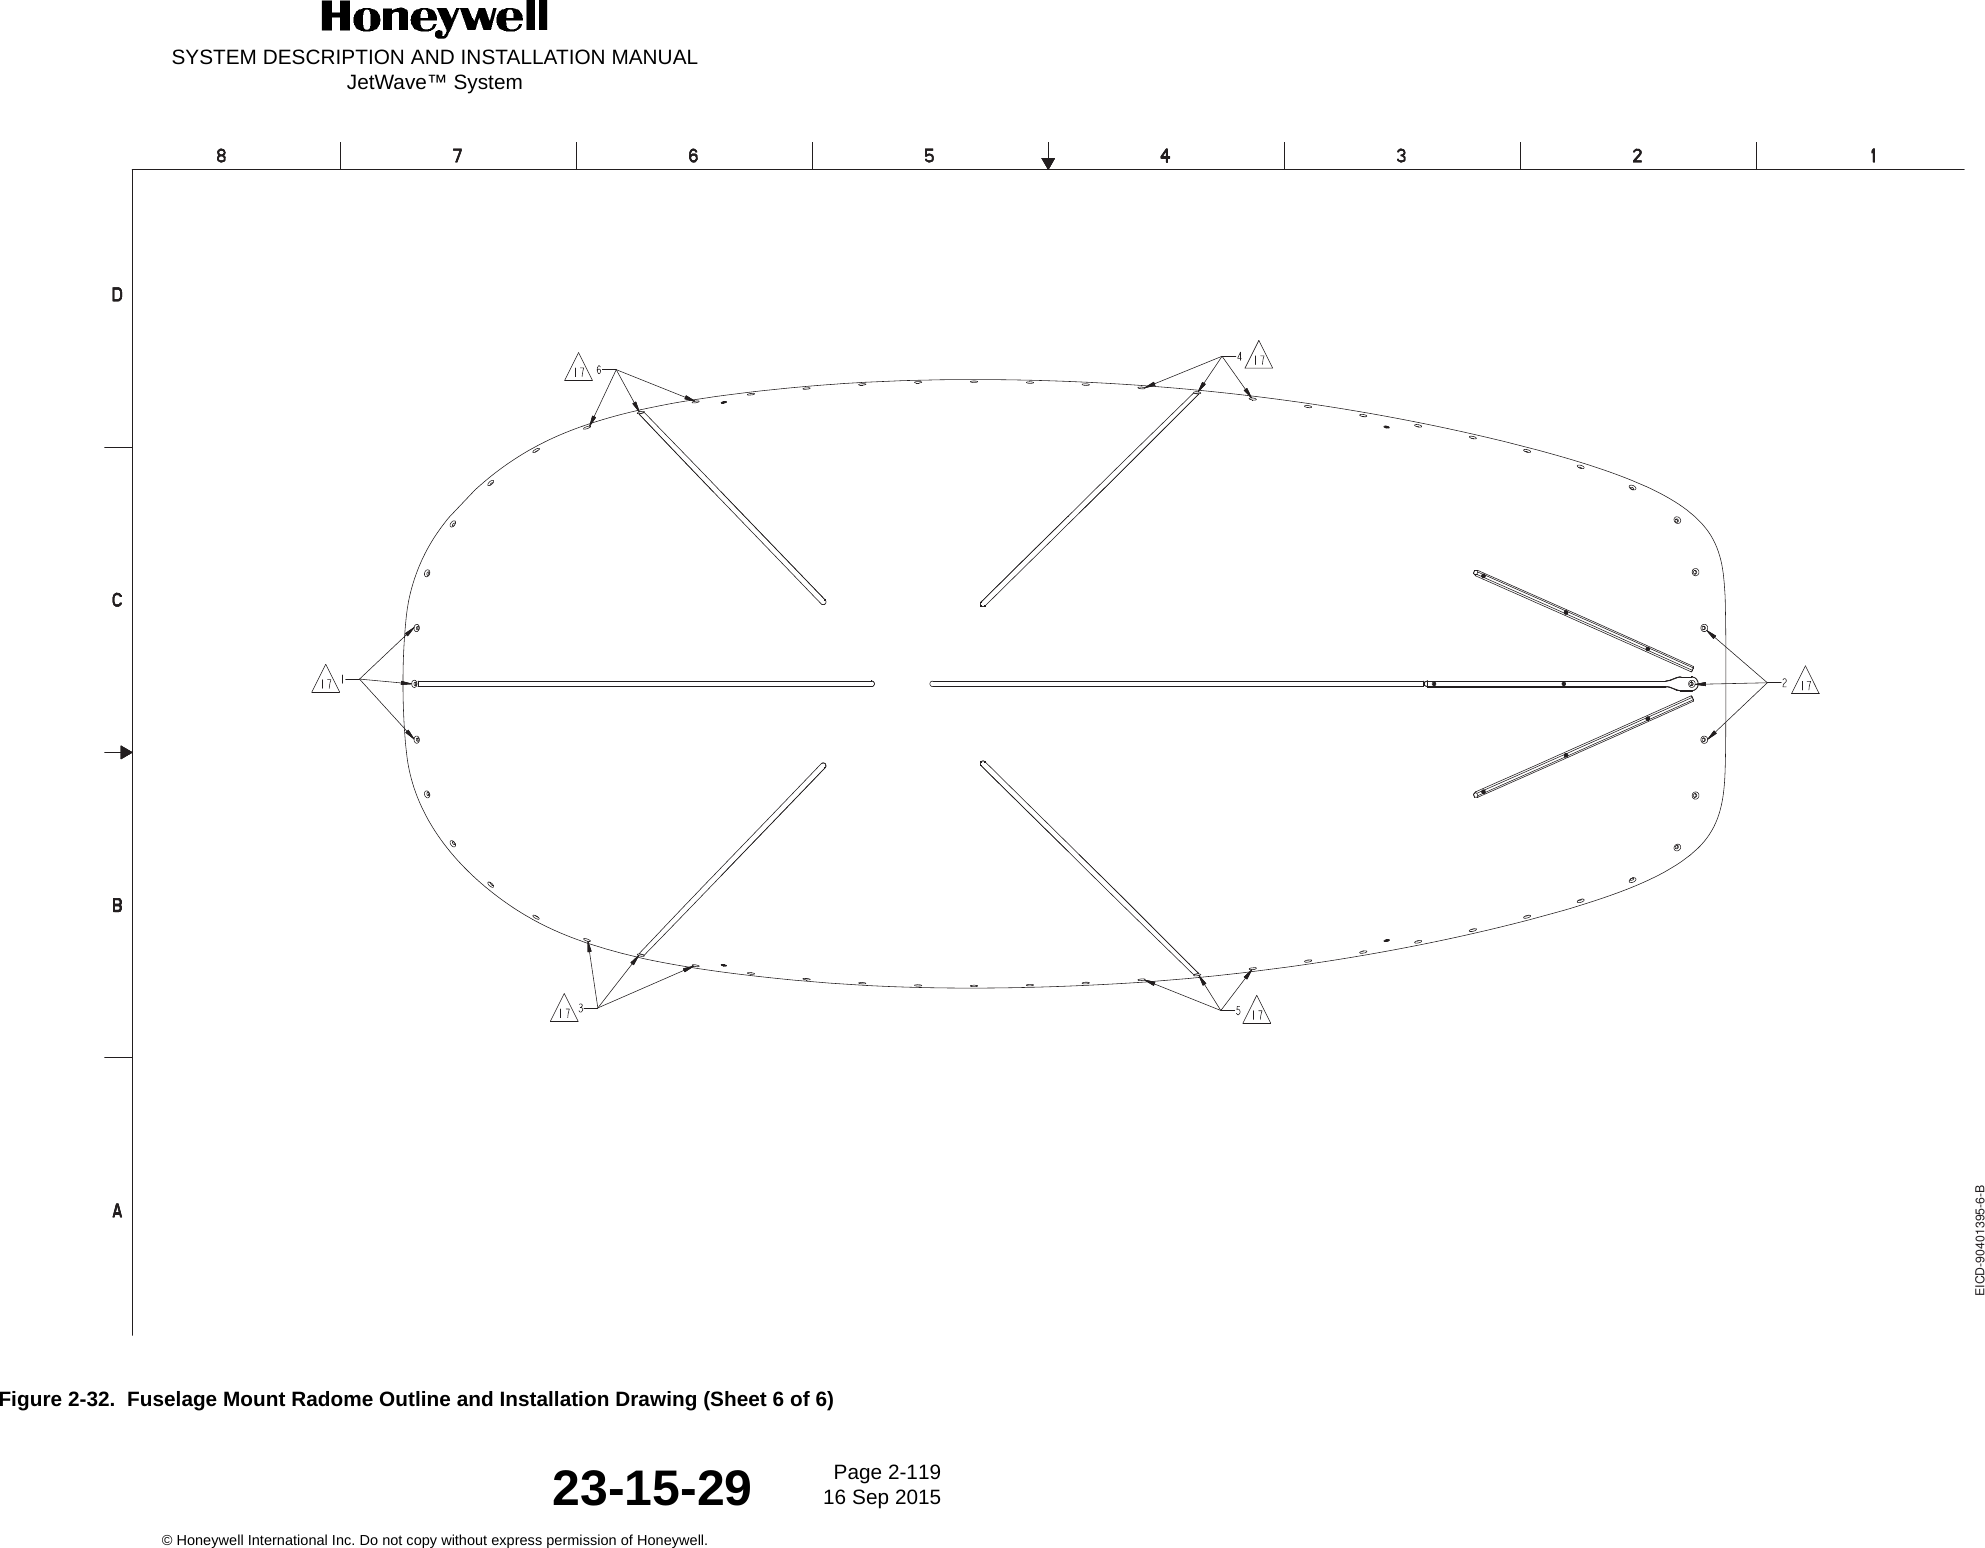 SYSTEM DESCRIPTION AND INSTALLATION MANUALJetWave™ SystemPage 2-119 16 Sep 2015© Honeywell International Inc. Do not copy without express permission of Honeywell.23-15-29Figure 2-32.  Fuselage Mount Radome Outline and Installation Drawing (Sheet 6 of 6) EICD-90401395-6-B